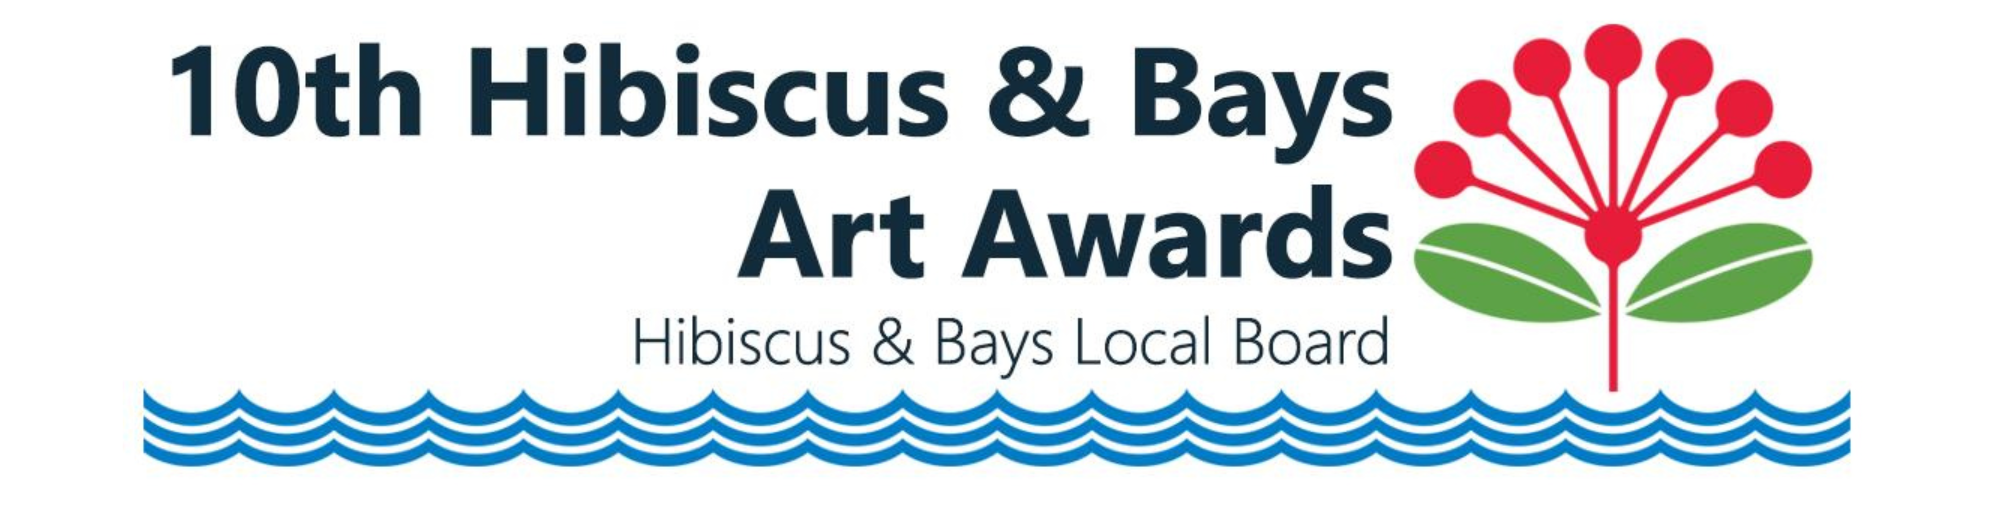 10th Hibiscus And Bays Art Awards Poster Auckland Artistic Gallery